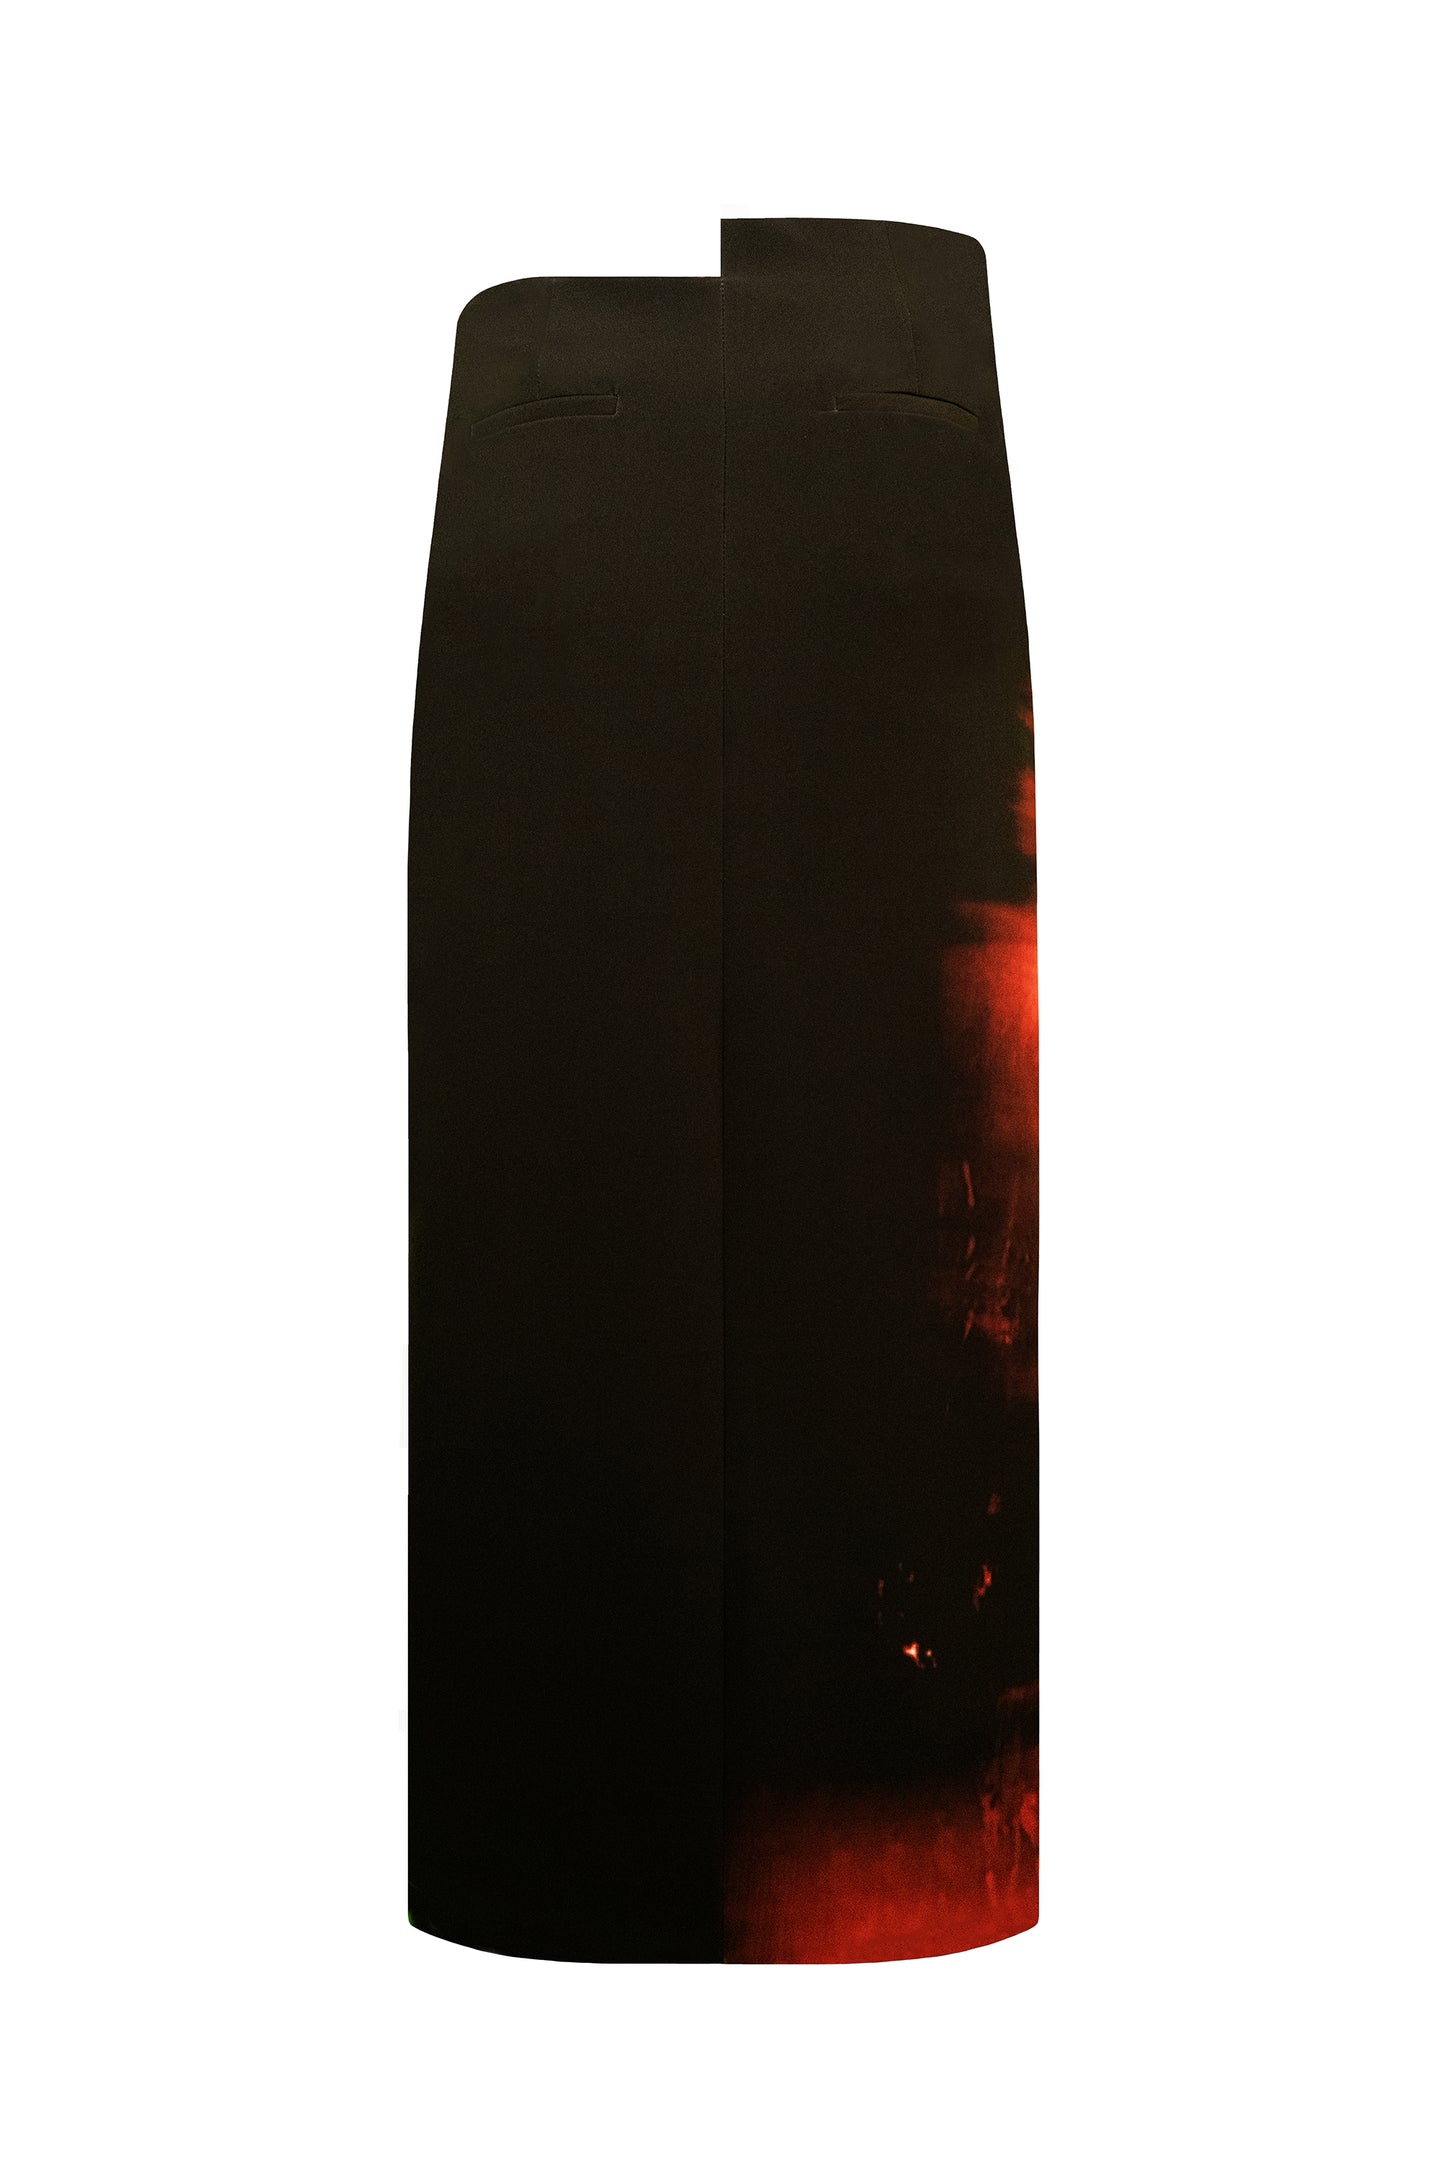 The photograph presents a long skirt with stepping on the waist and original print. The print is inspired to recreate a woman's facial movement of the exact moment when feeling satisfaction. The skirt photograph is from the back on a white background.